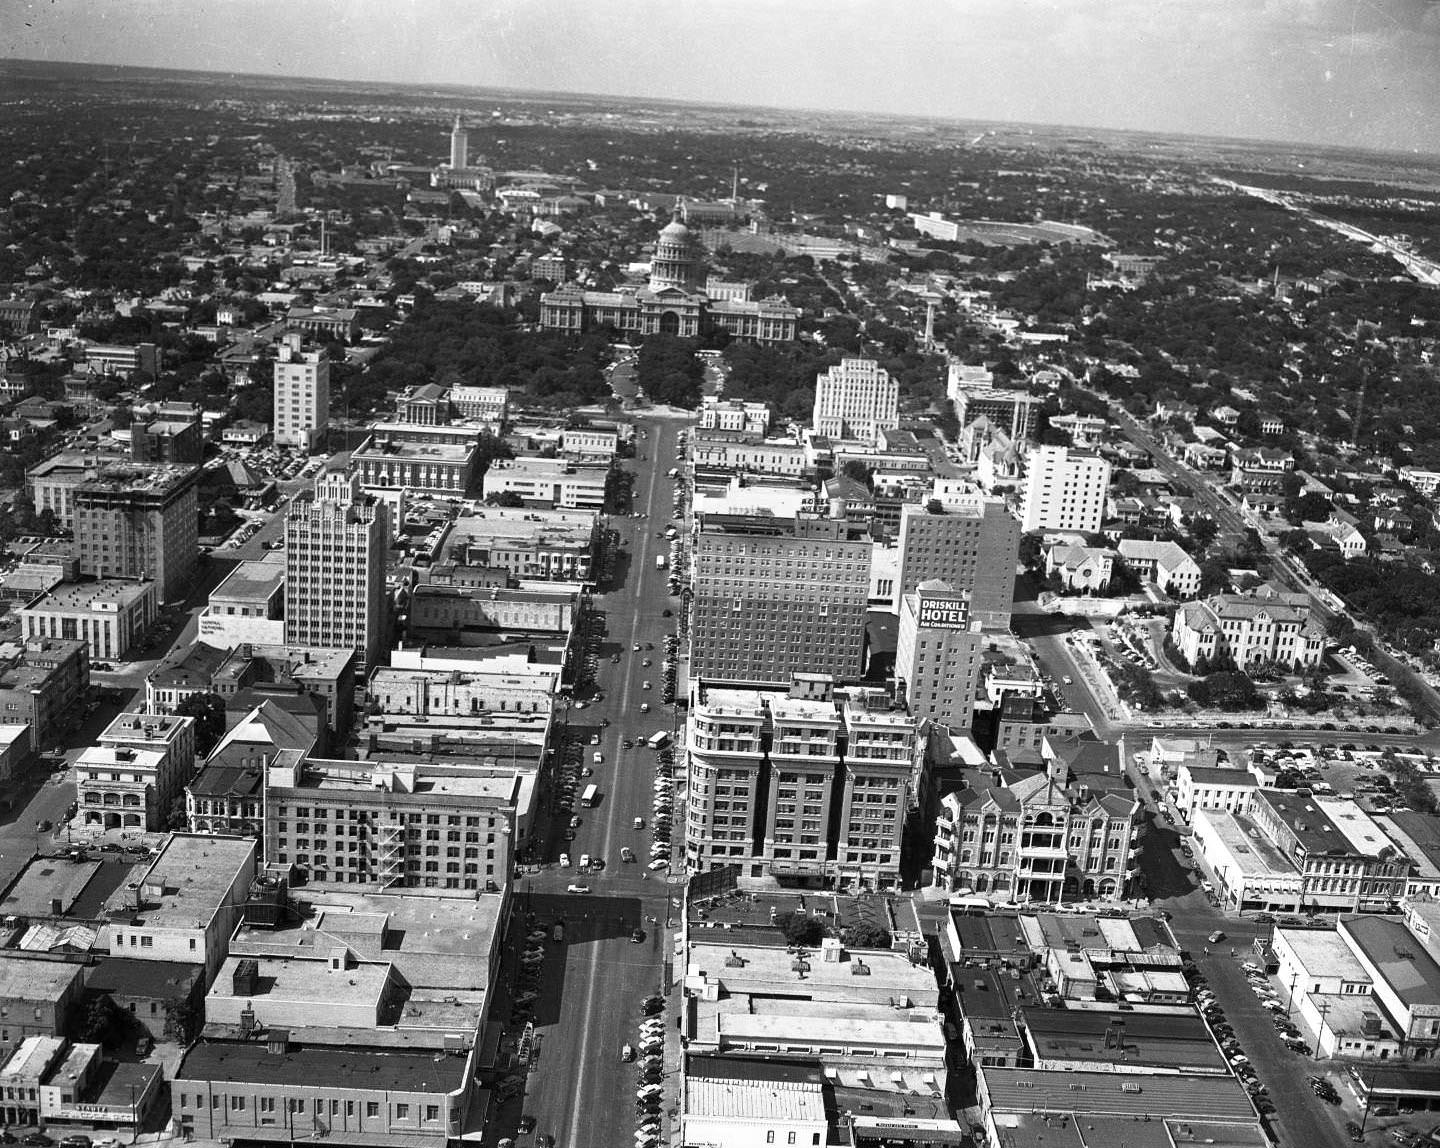 Directly south of the State Capitol and above Congress Ave., Shot of downtown Austin with The Driskill, Captiol, and UT Tower in view, 1959